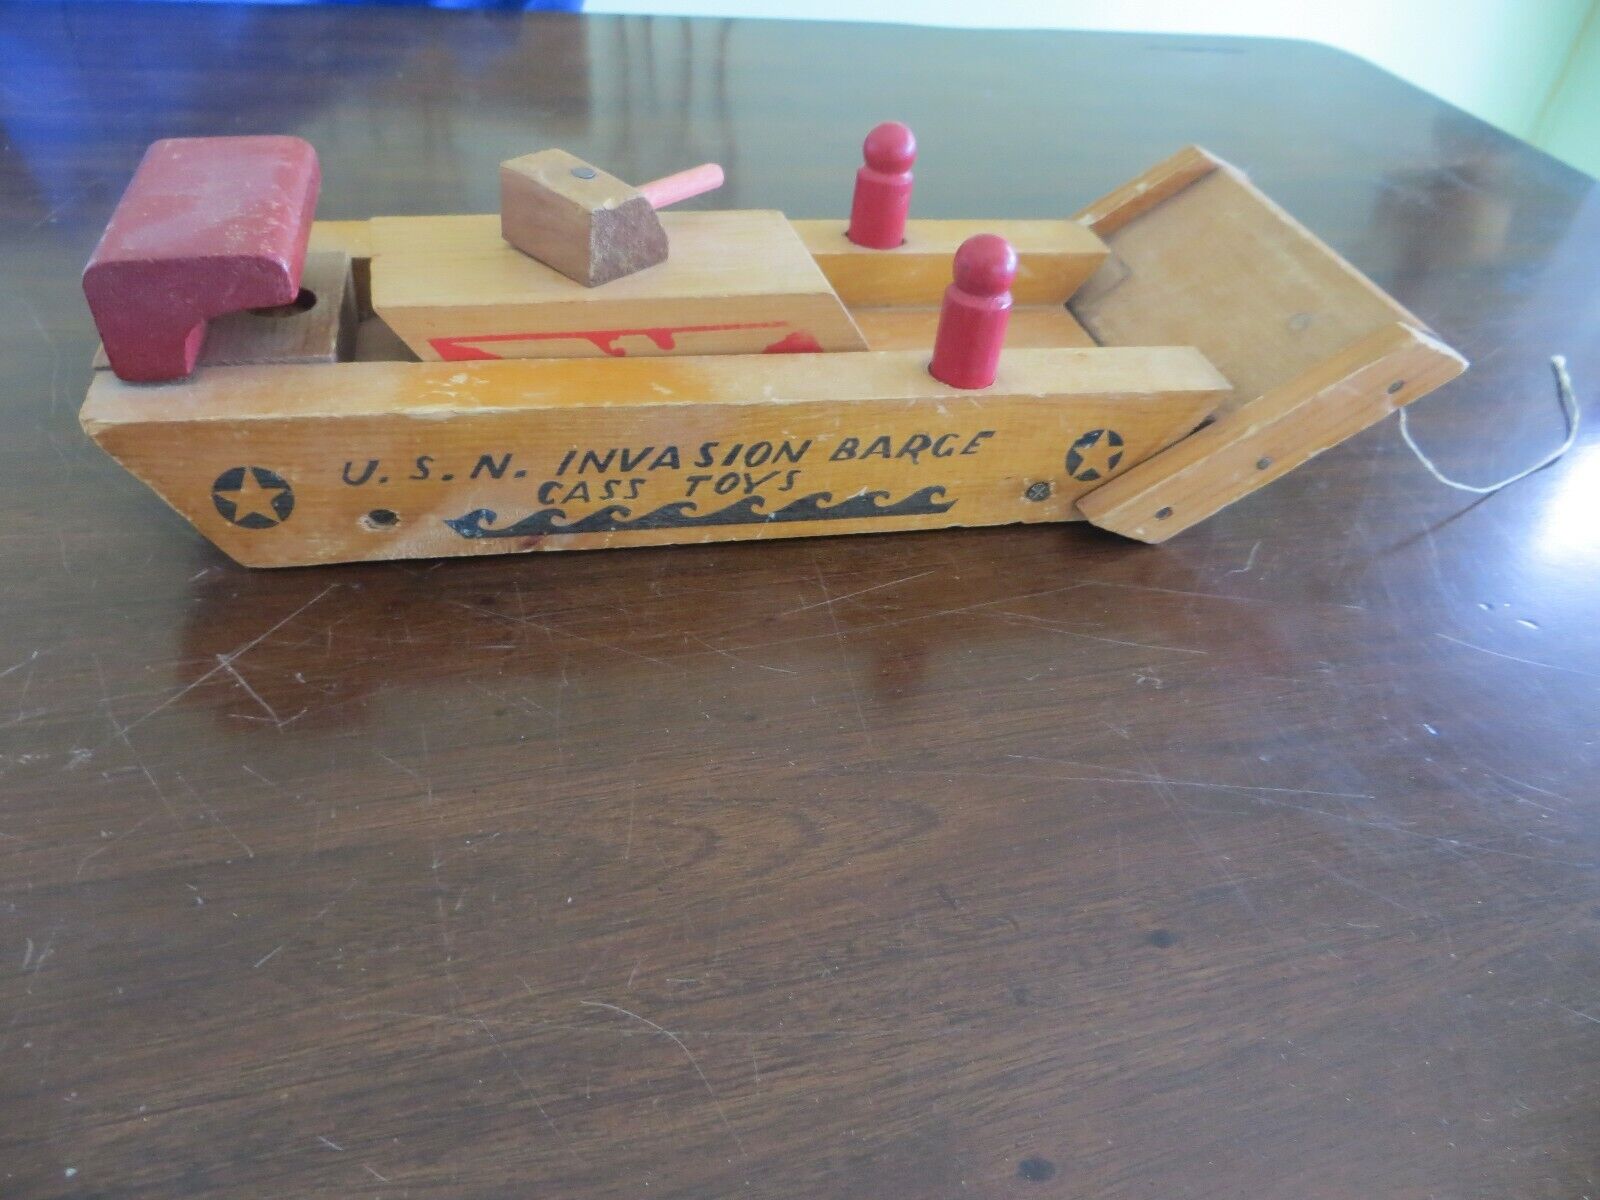 U.S.N.INVASION BARGE & TANK,CASS TOYS WOODEN ANTIQUE MILITARY WAR BOAT SHIP  NAVY